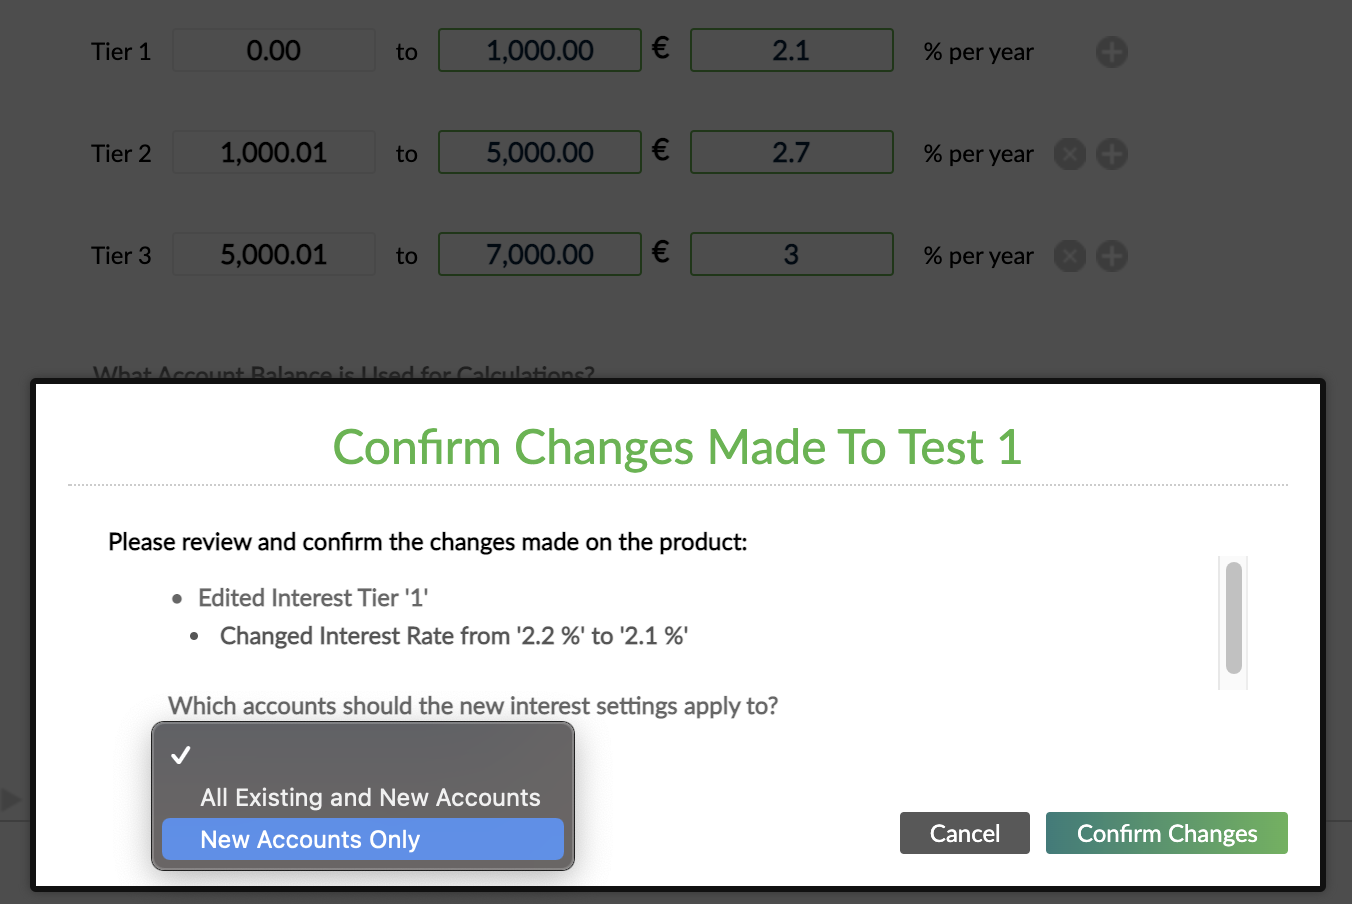 Confirm changes dialog where you can specify if you want your changes to apply to all existing and new accounts or To new accounts only